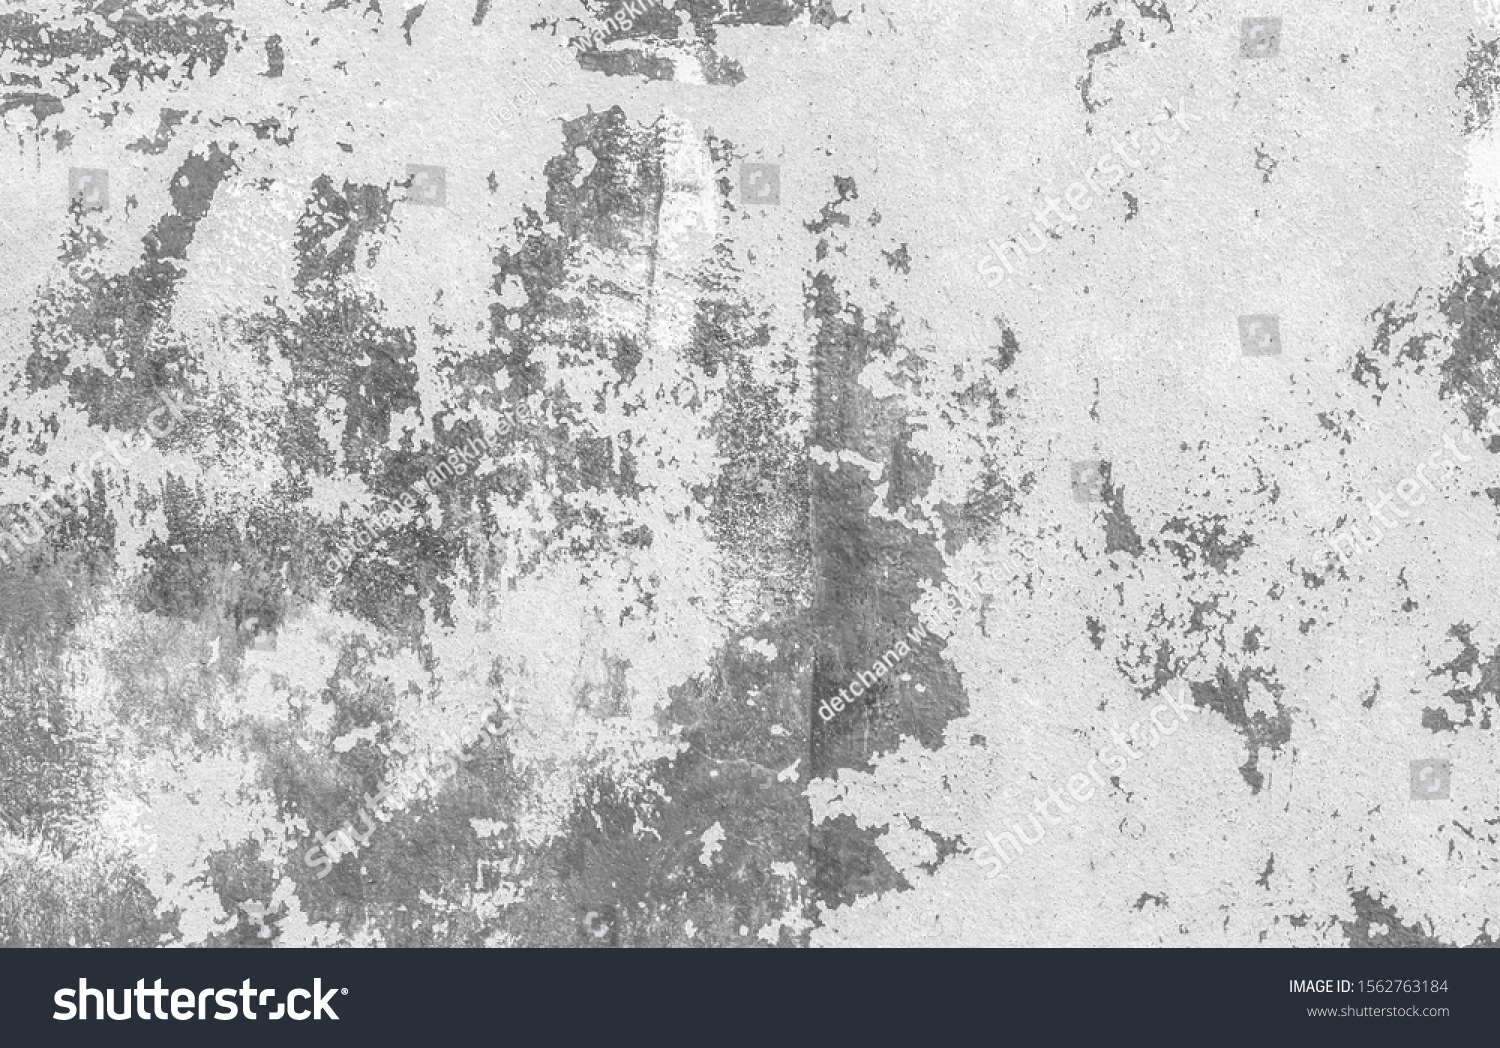 Grunge black and white abstract distress background or texture #1562763184